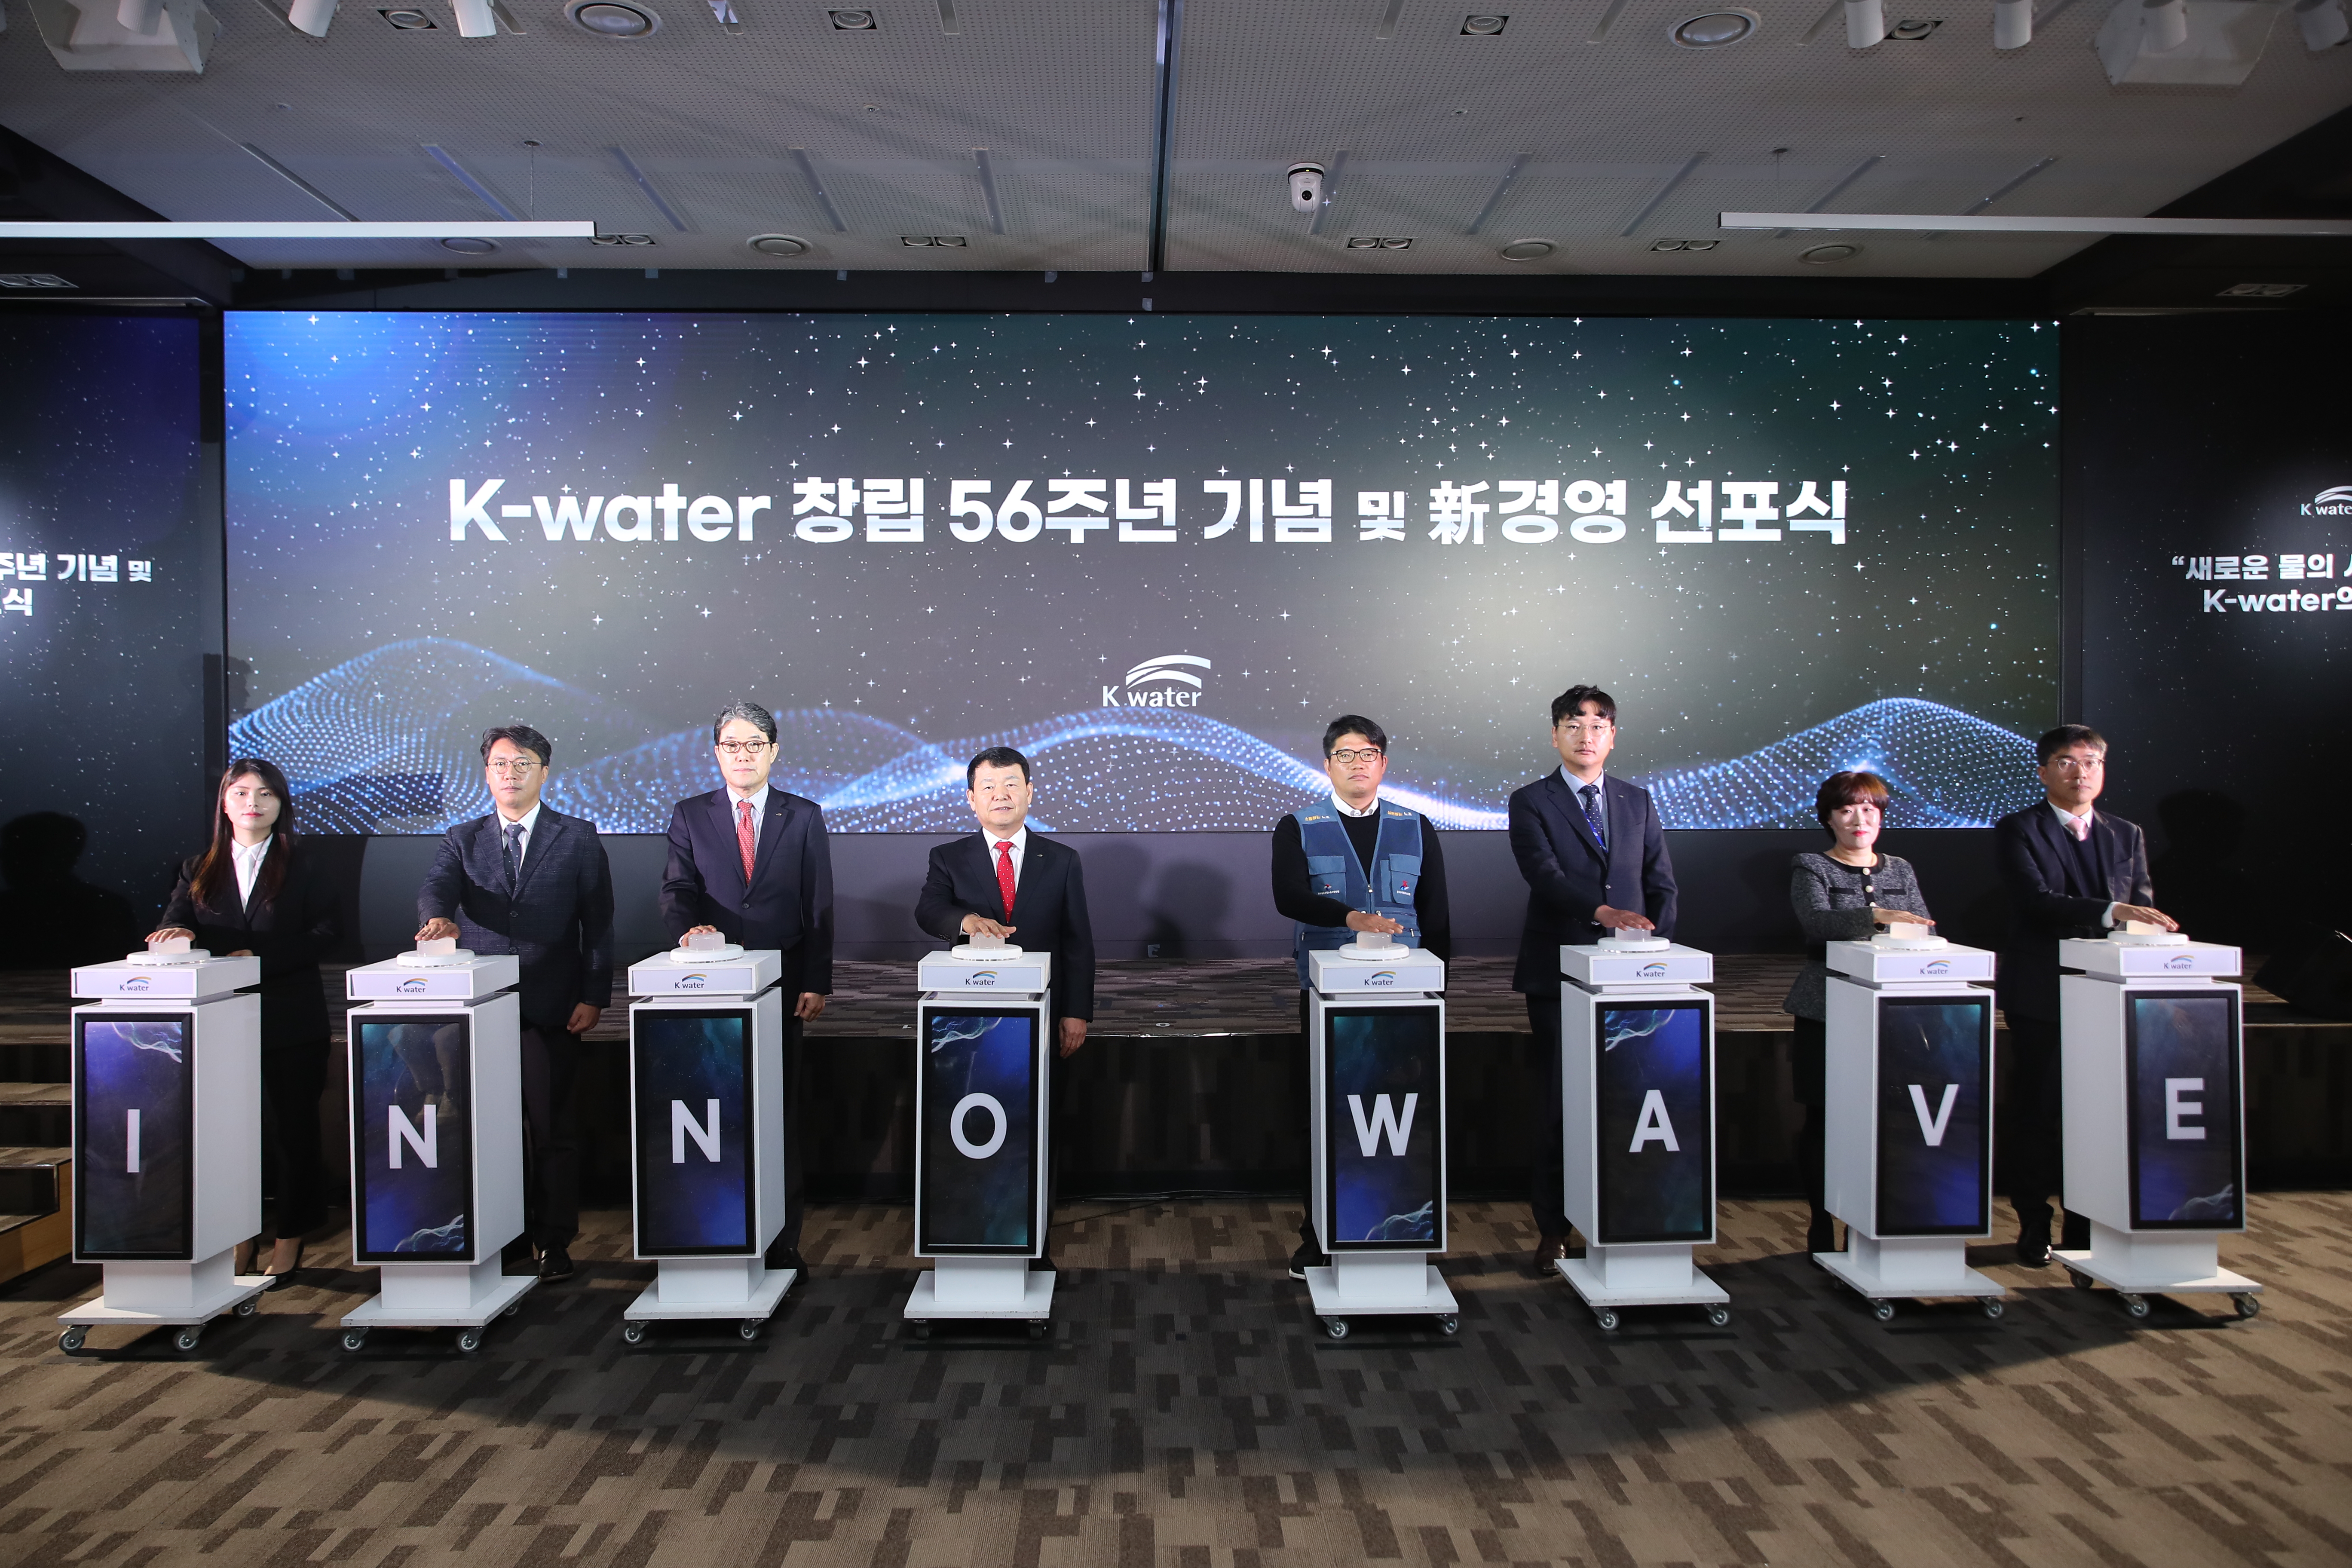 K-water Celebrates 56th Anniversary with New Management Declaration Ceremony